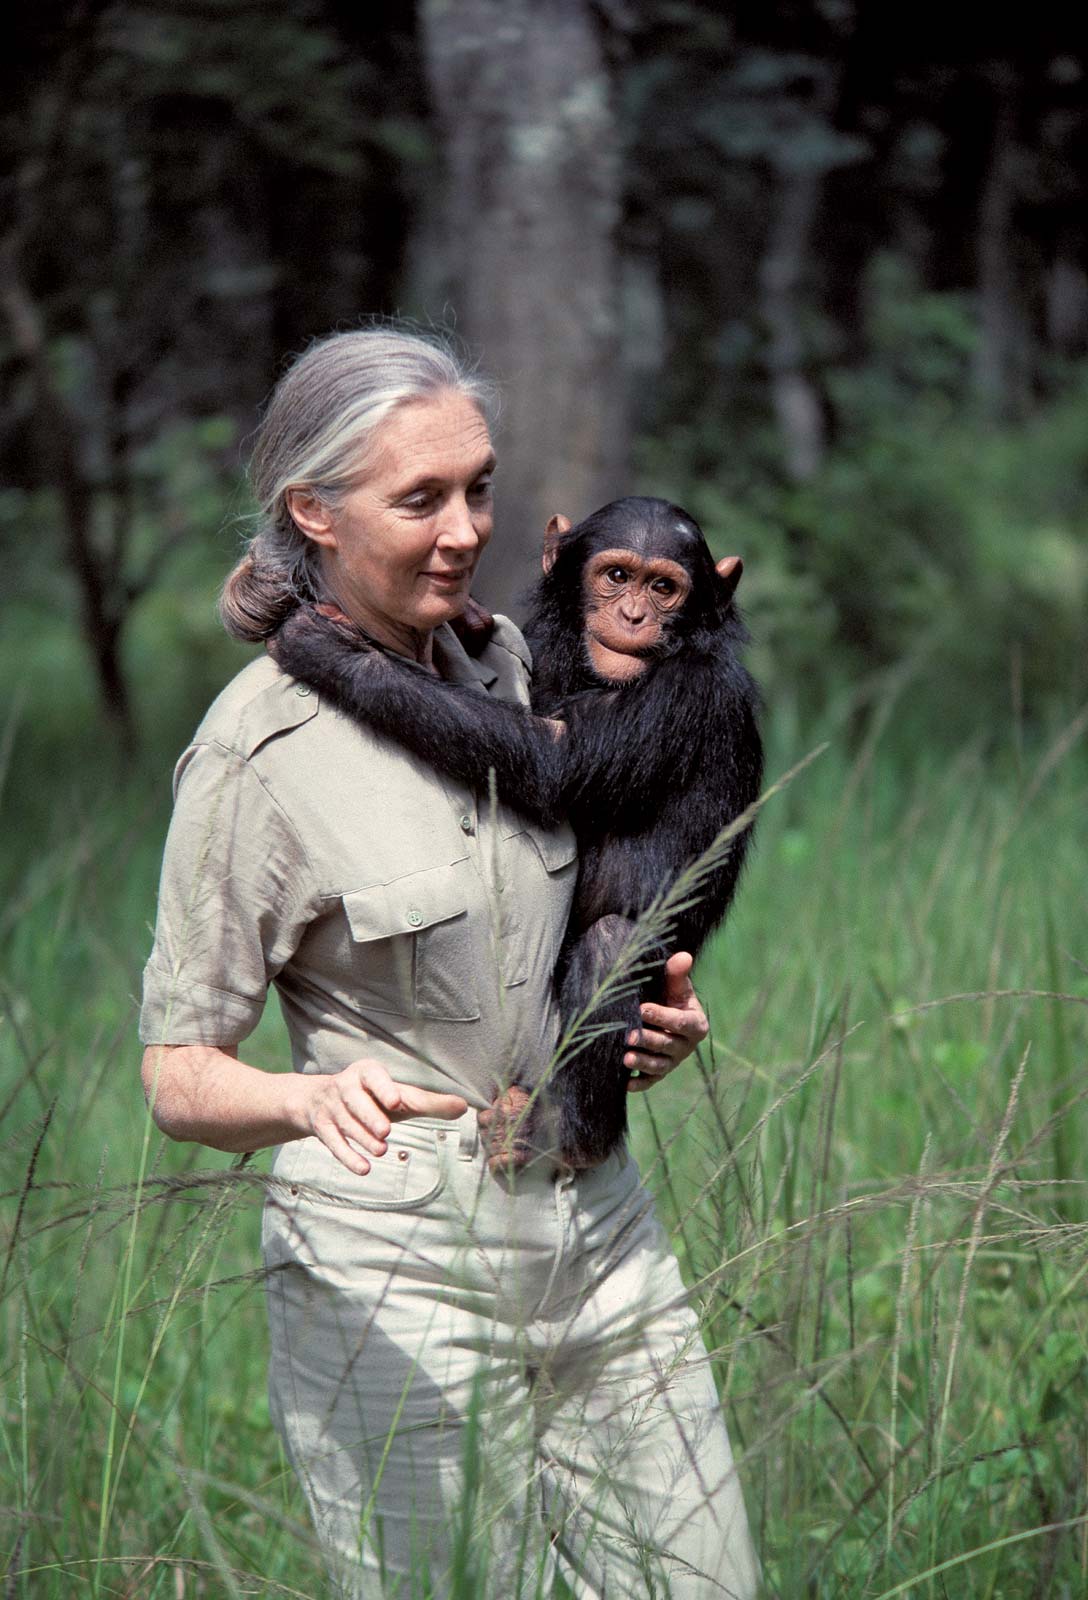 Jane Goodall's Roots and Shoots The World's Largest Lesson